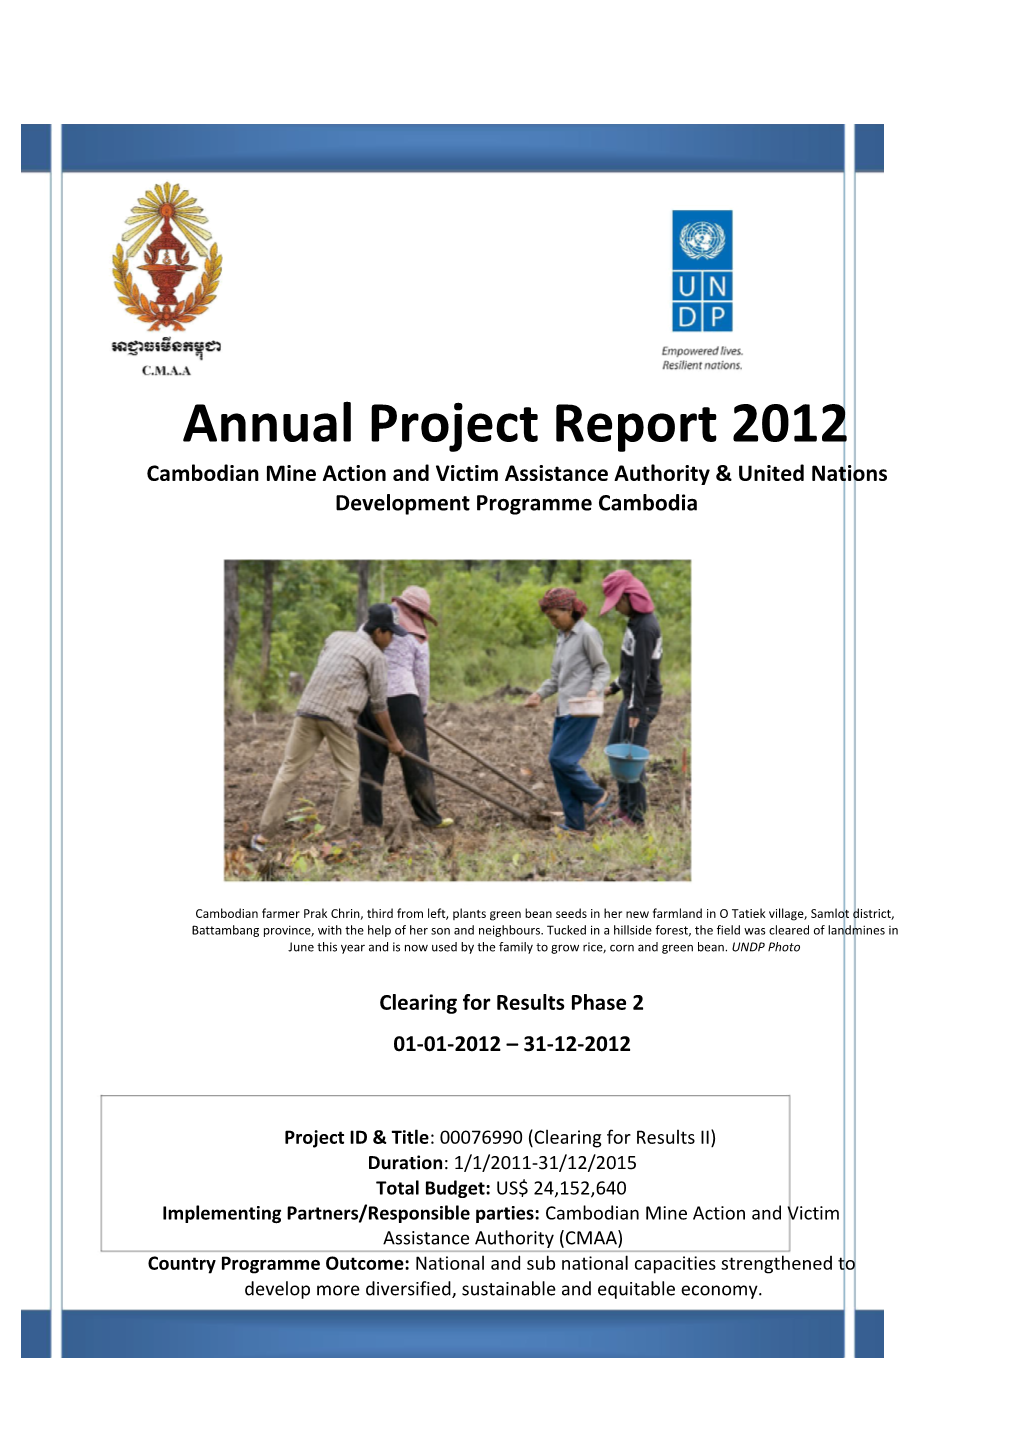 Cambodian Mine Action and Victim Assistance Authority & United Nations